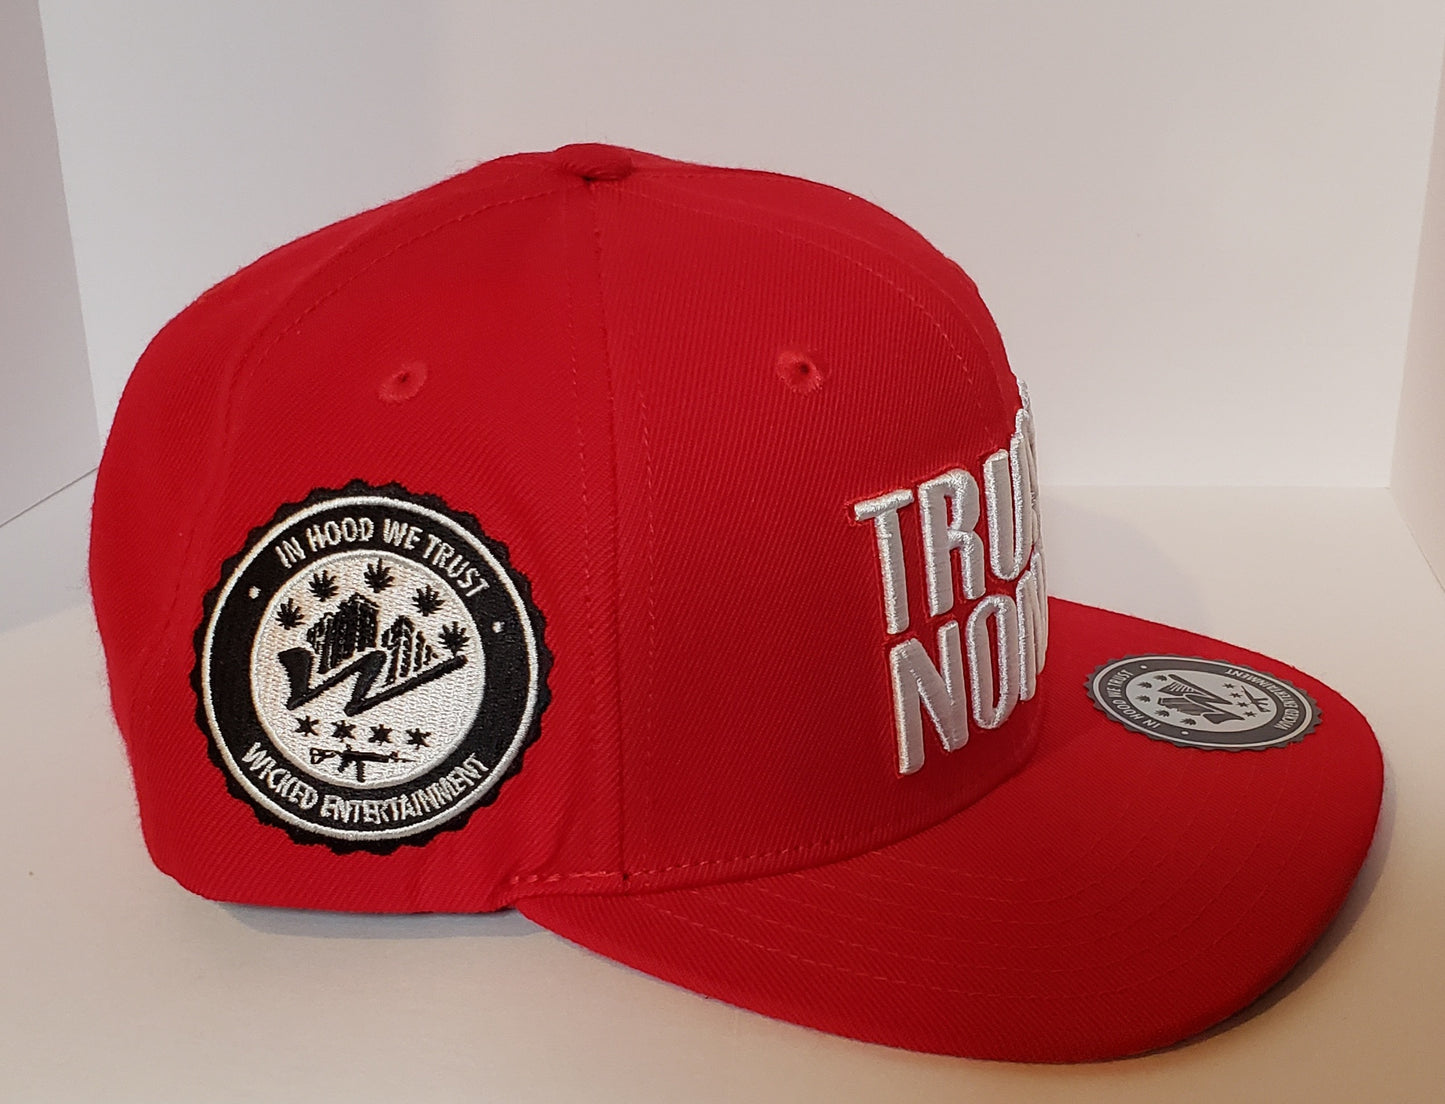 Trust None - Snapback Hat - Red